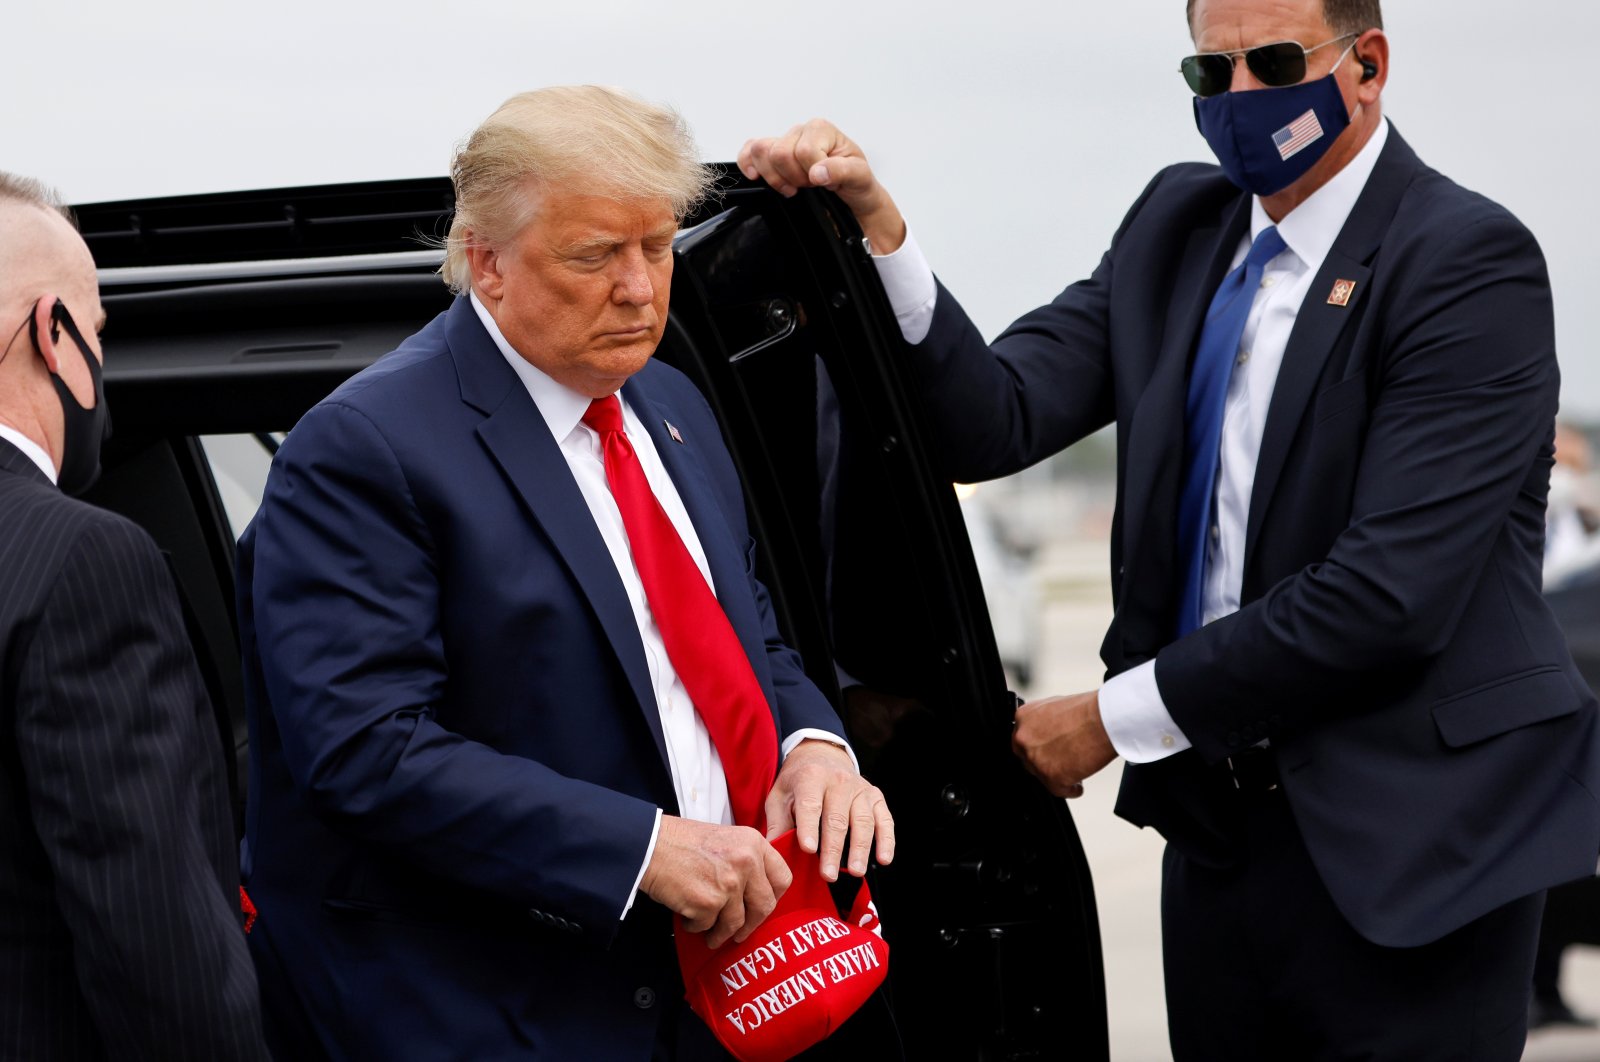 U.S. President Donald Trump holds a "Make America Great Again" cap while arriving to board Air Force One as he departs Florida for campaign travel to North Carolina, Pennsylvania, Michigan and Wisconsin at Miami International Airport in Miami, Florida, U.S., Nov. 2, 2020. (Reuters Photo)